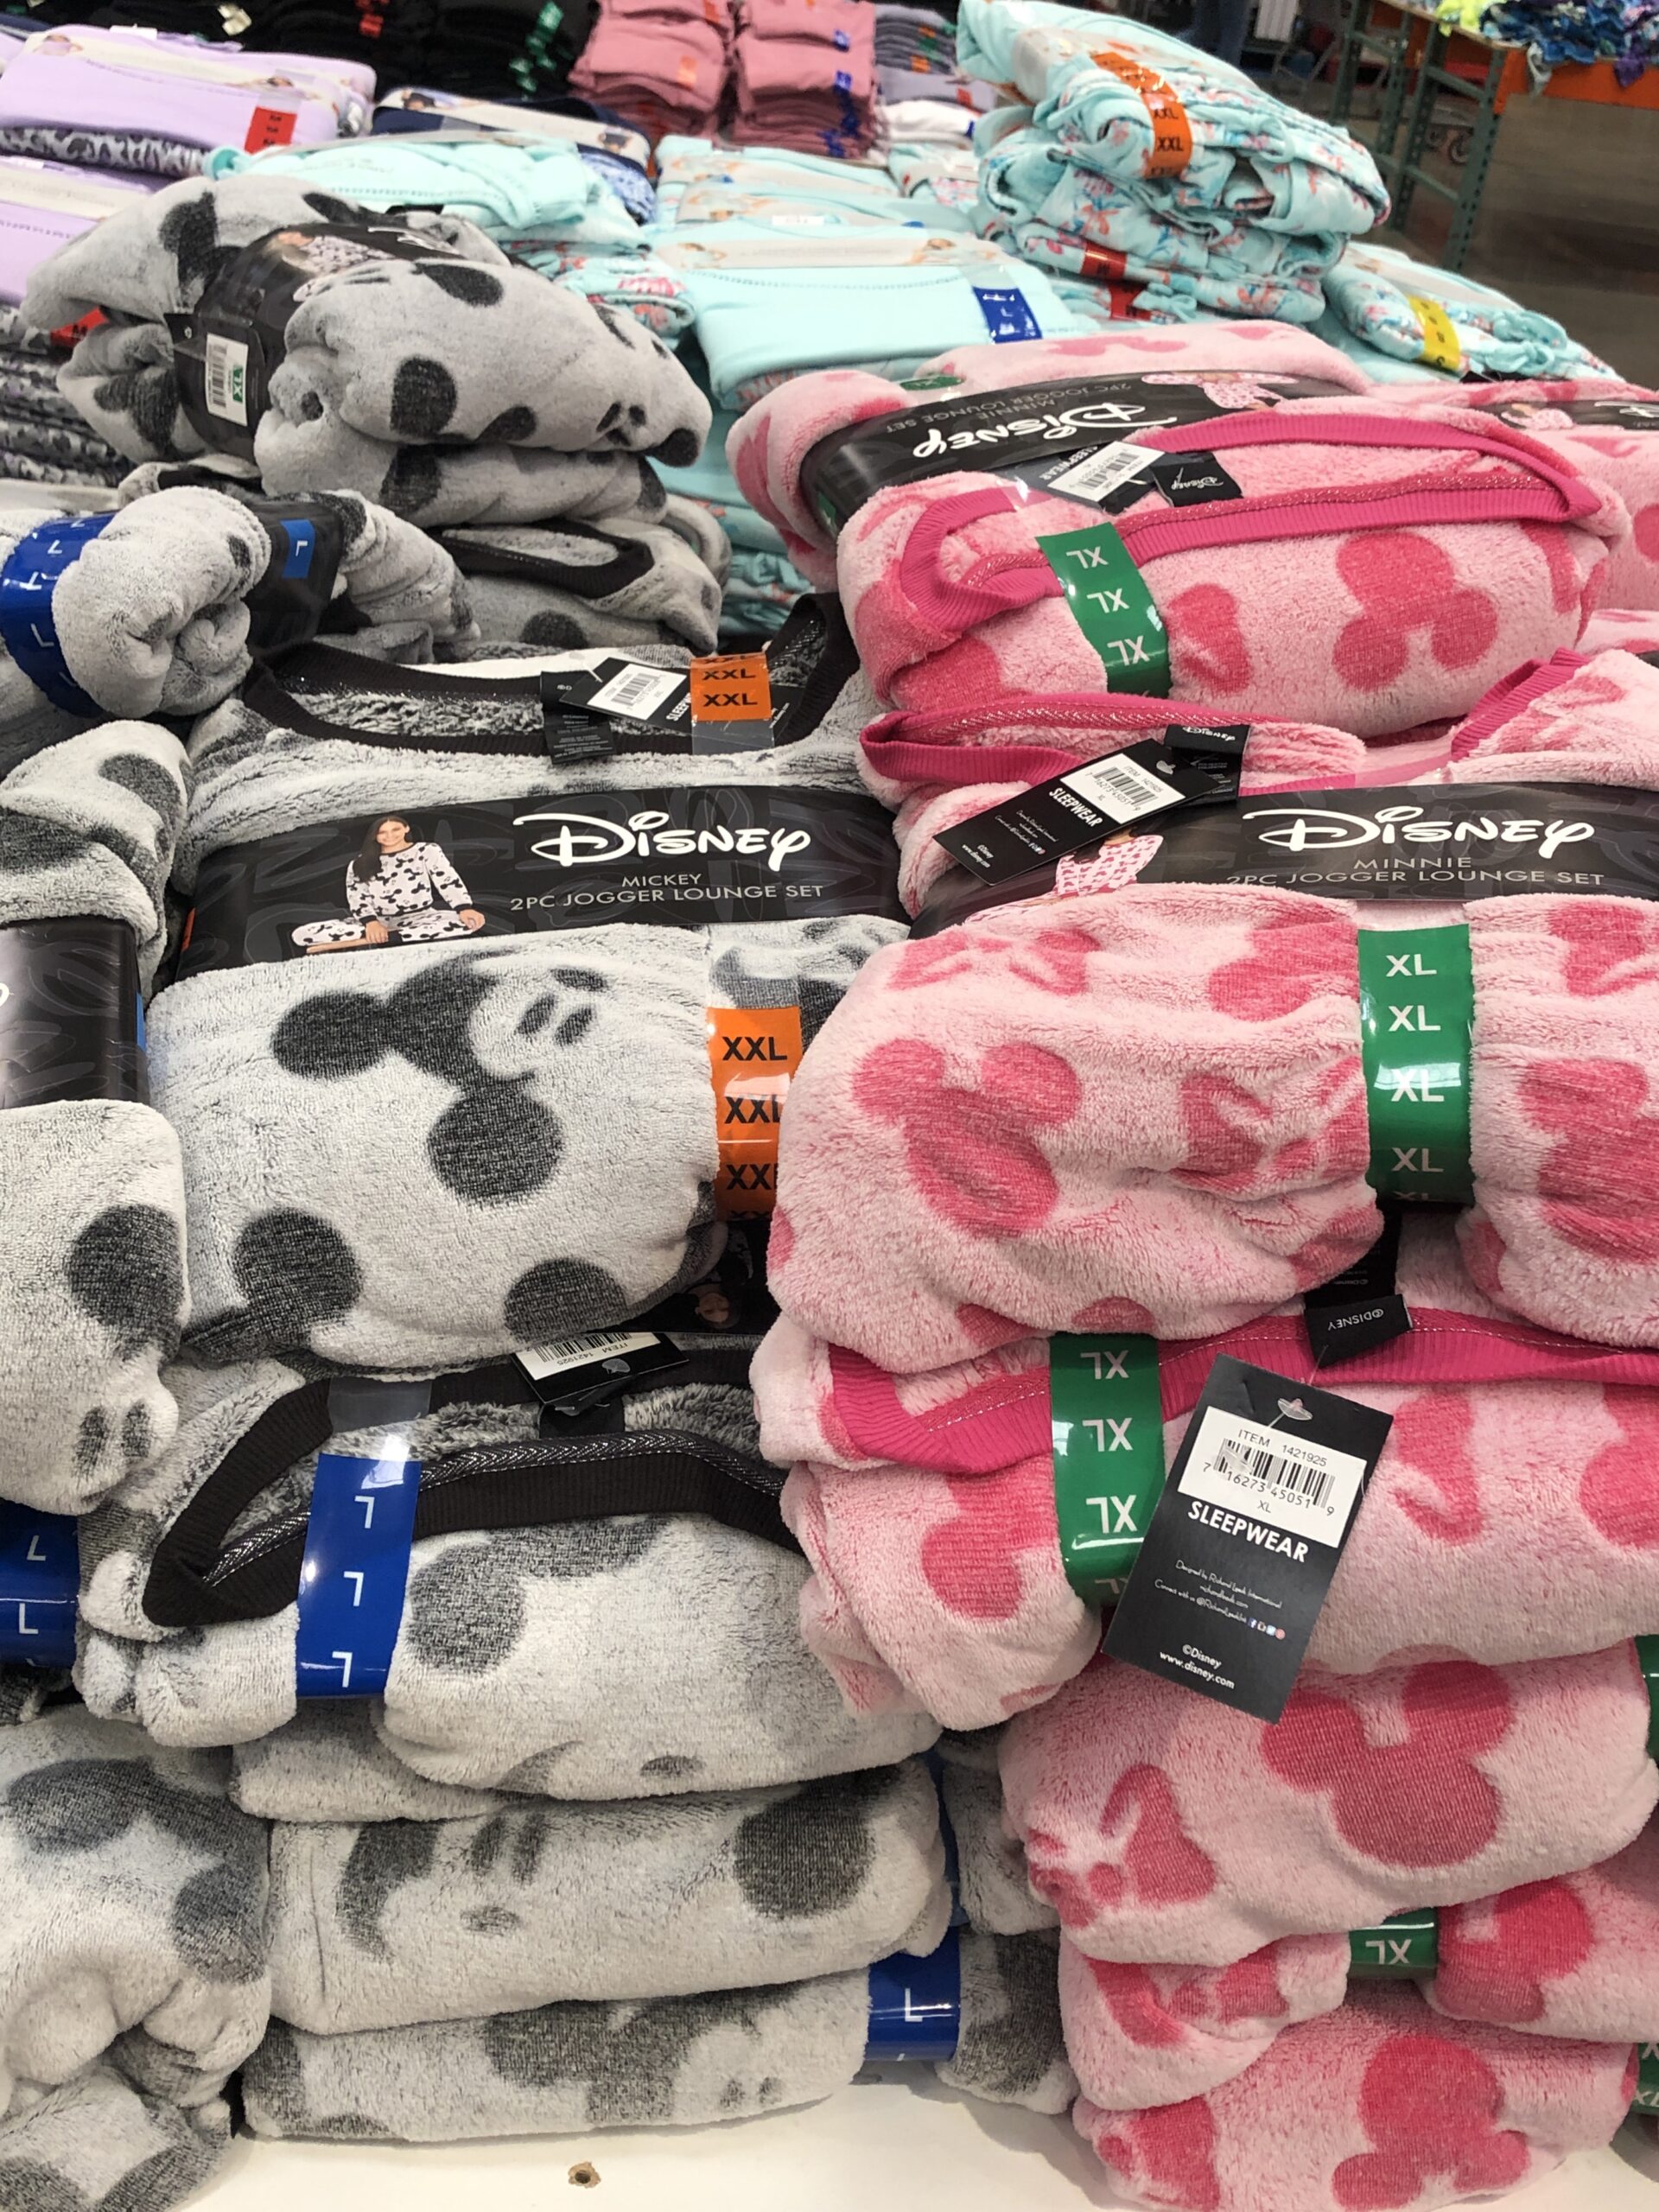 Cuddle Up With This Cozy PJs from Costco